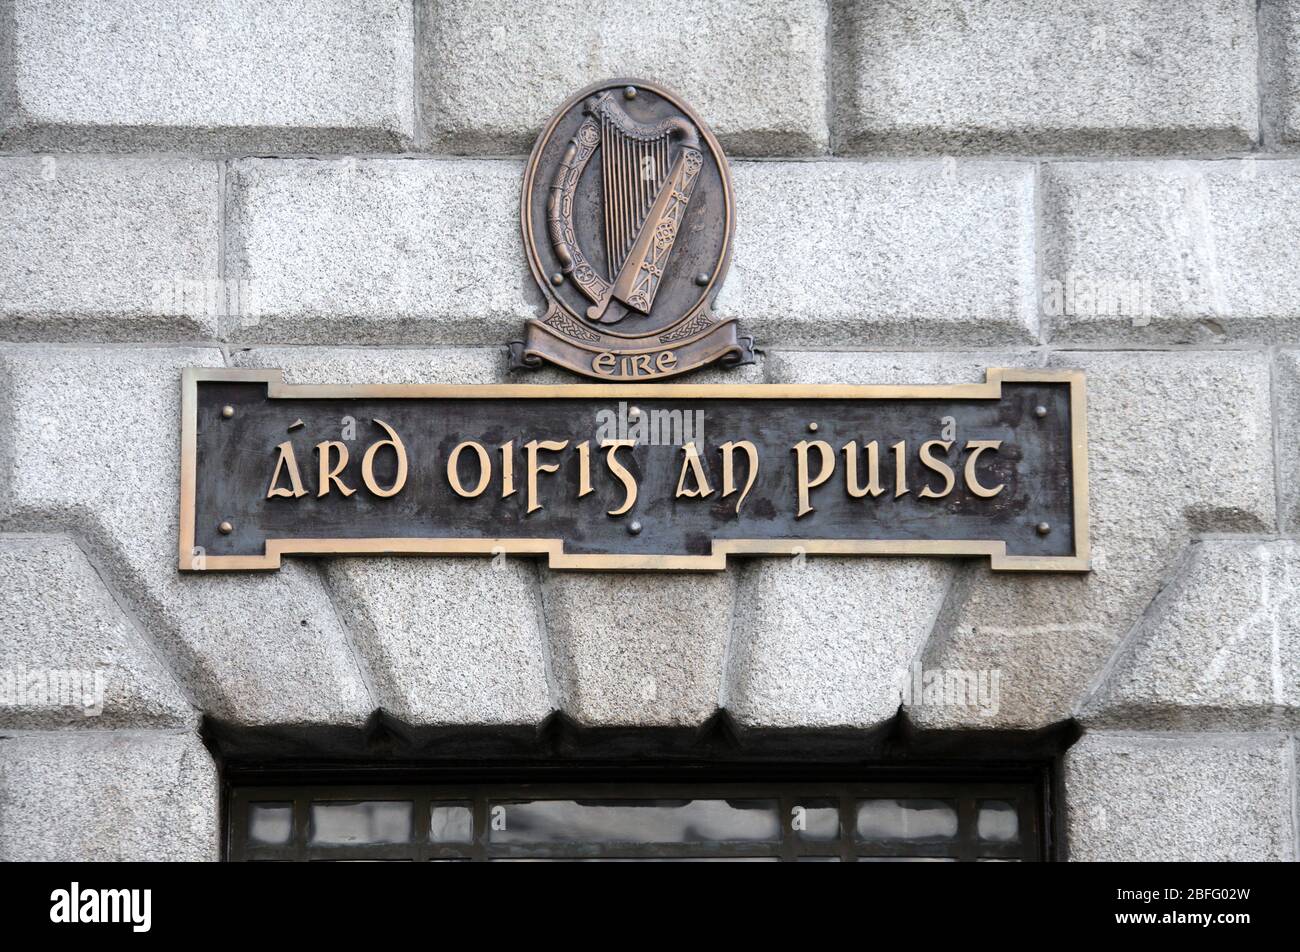 Gaelic script on the sign at Dublin General Post Office in Ireland Stock Photo